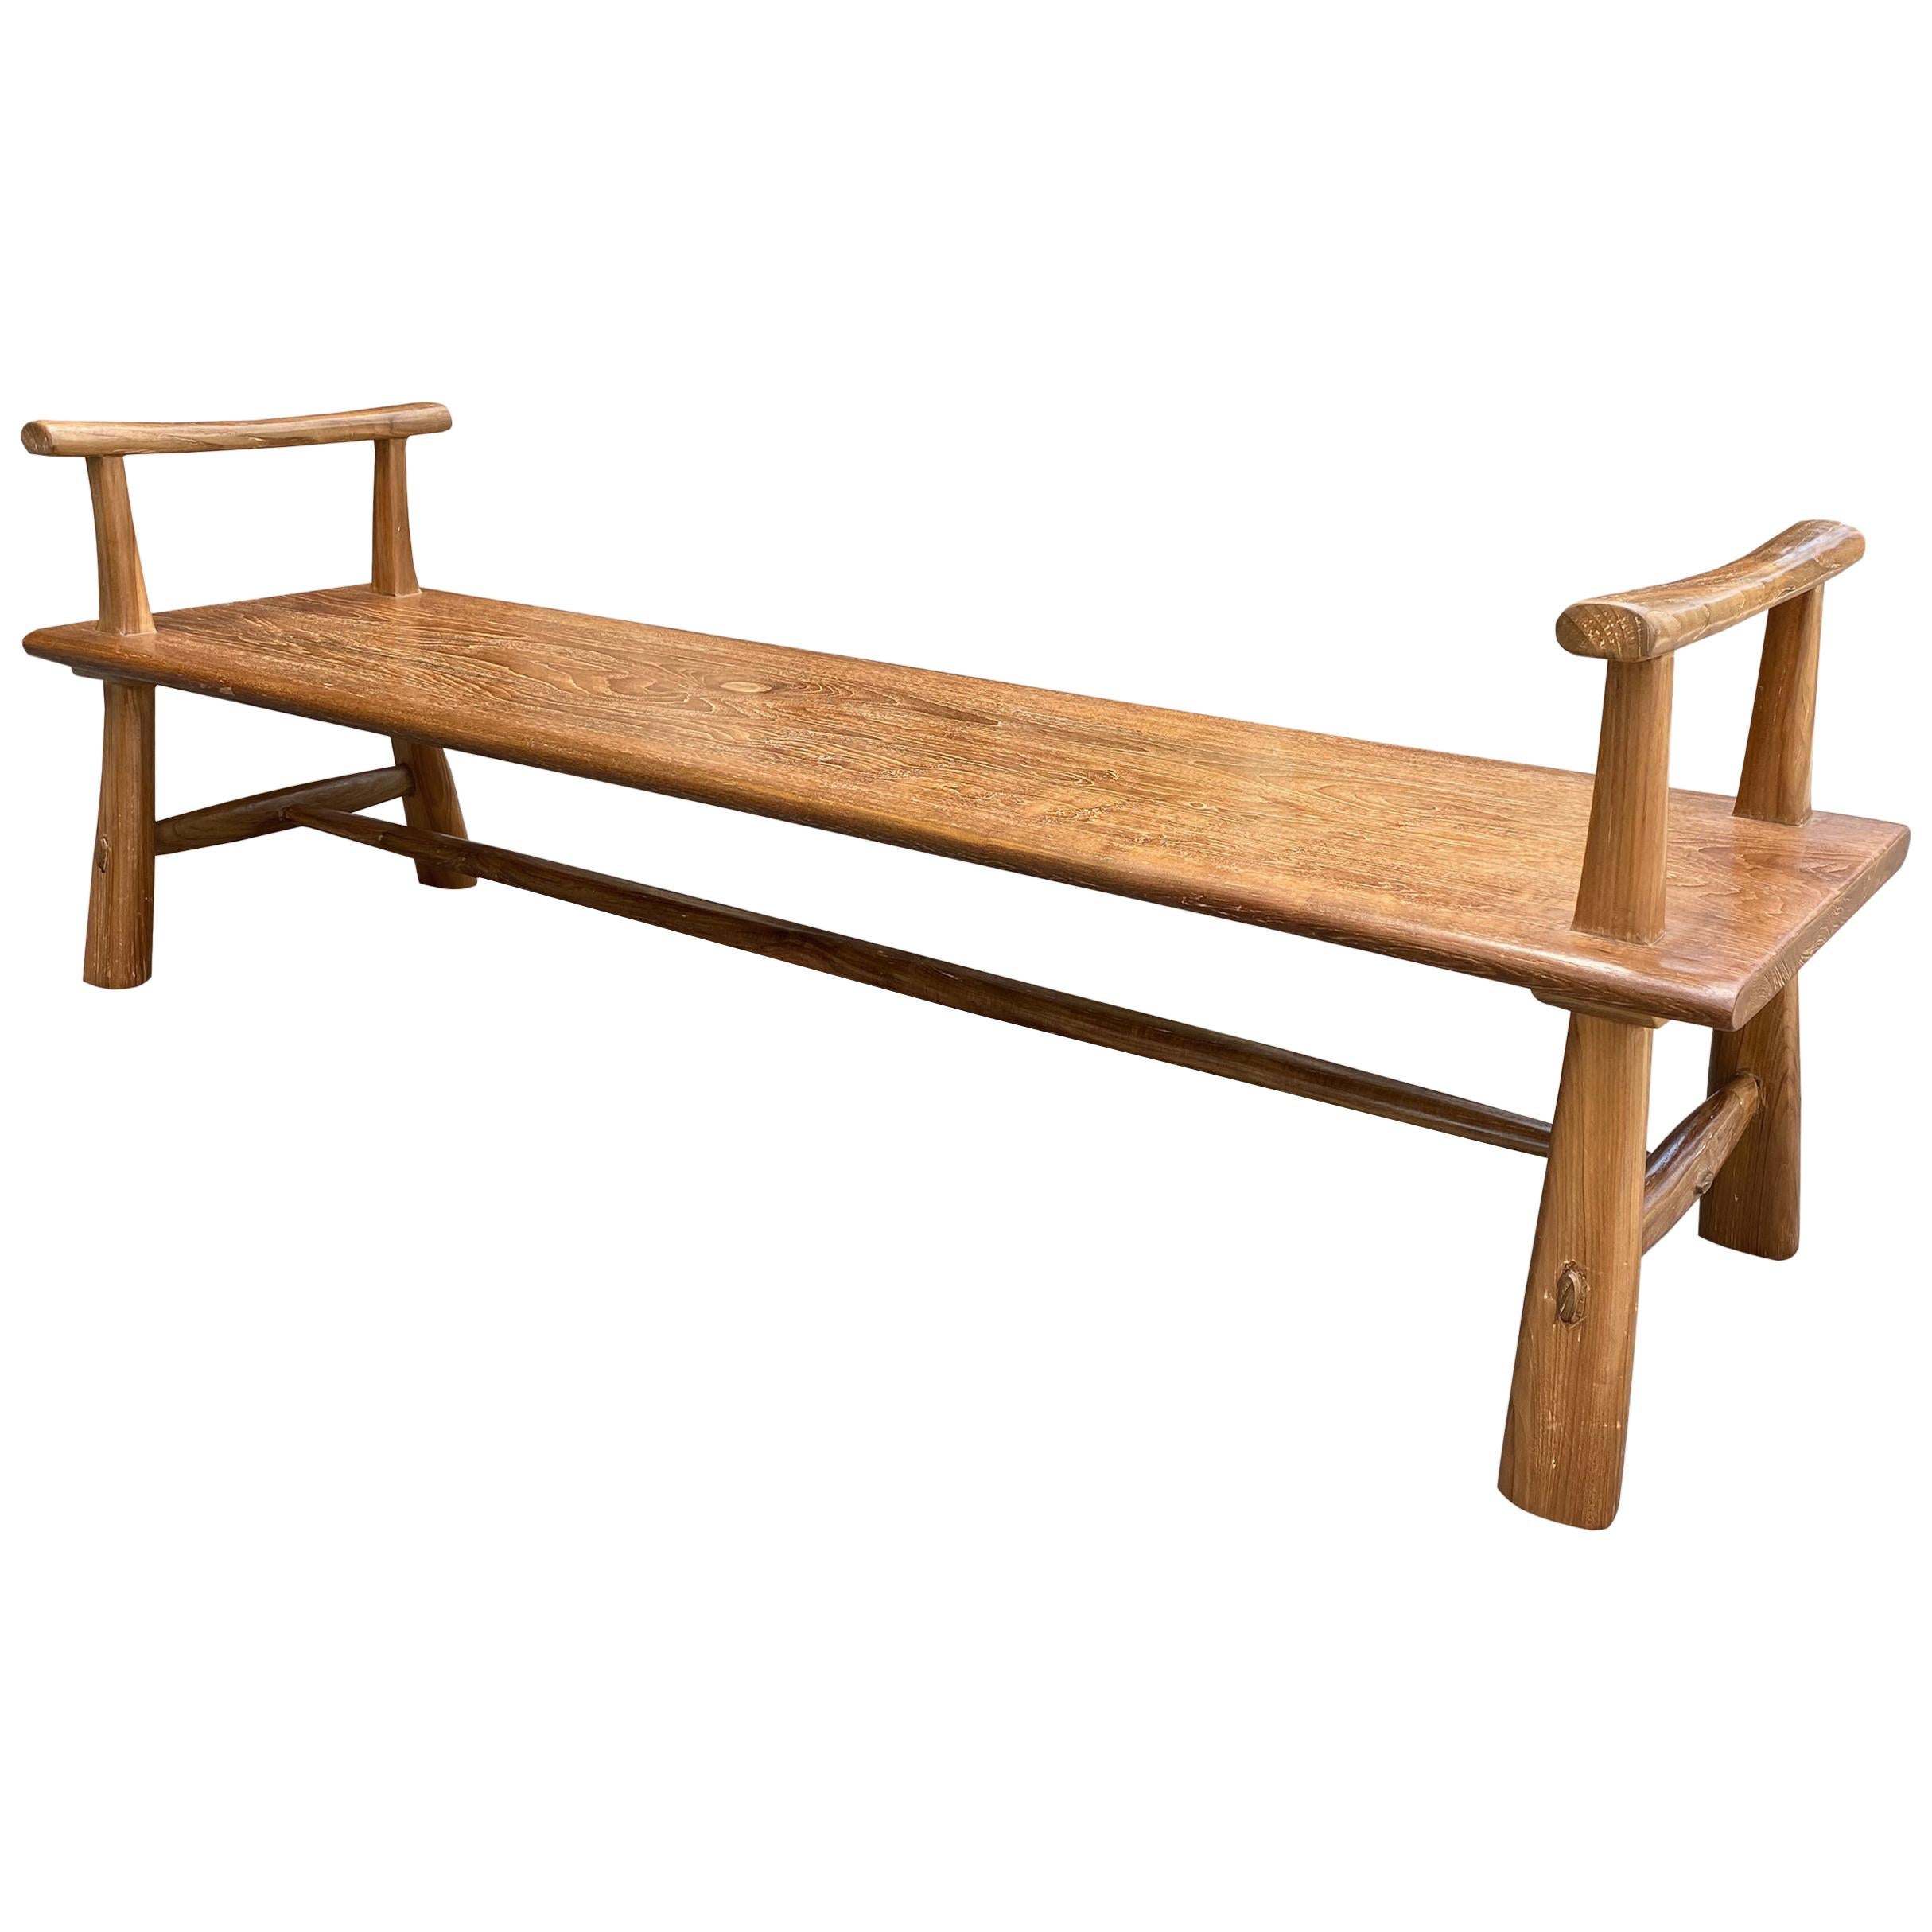 Andrianna Shamaris Midcentury Couture Teak Wood Bench with Arms